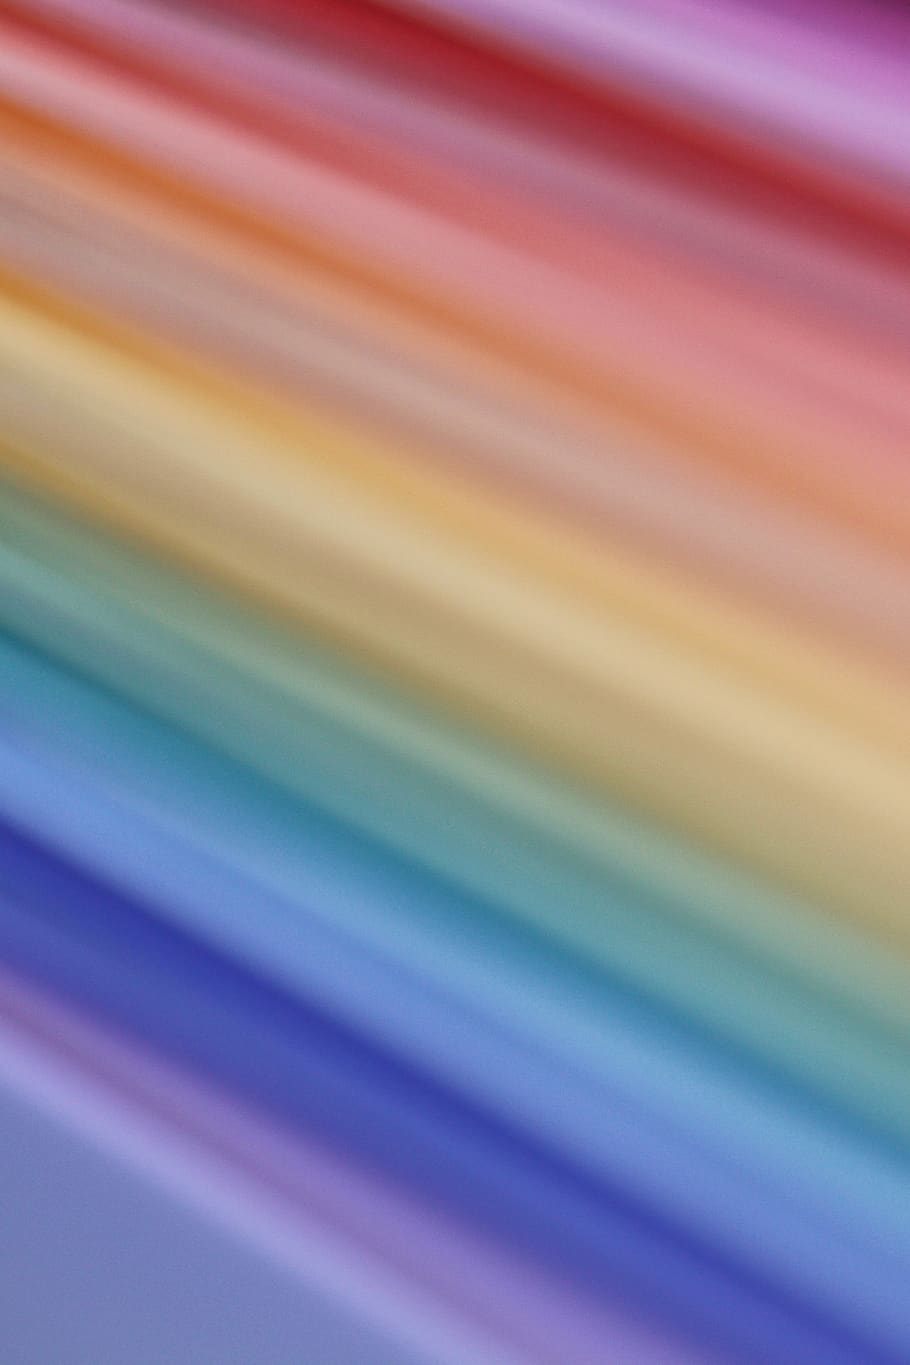 colorful, rainbow, background, abstract, pattern, art, texture, spectrum, light, effect